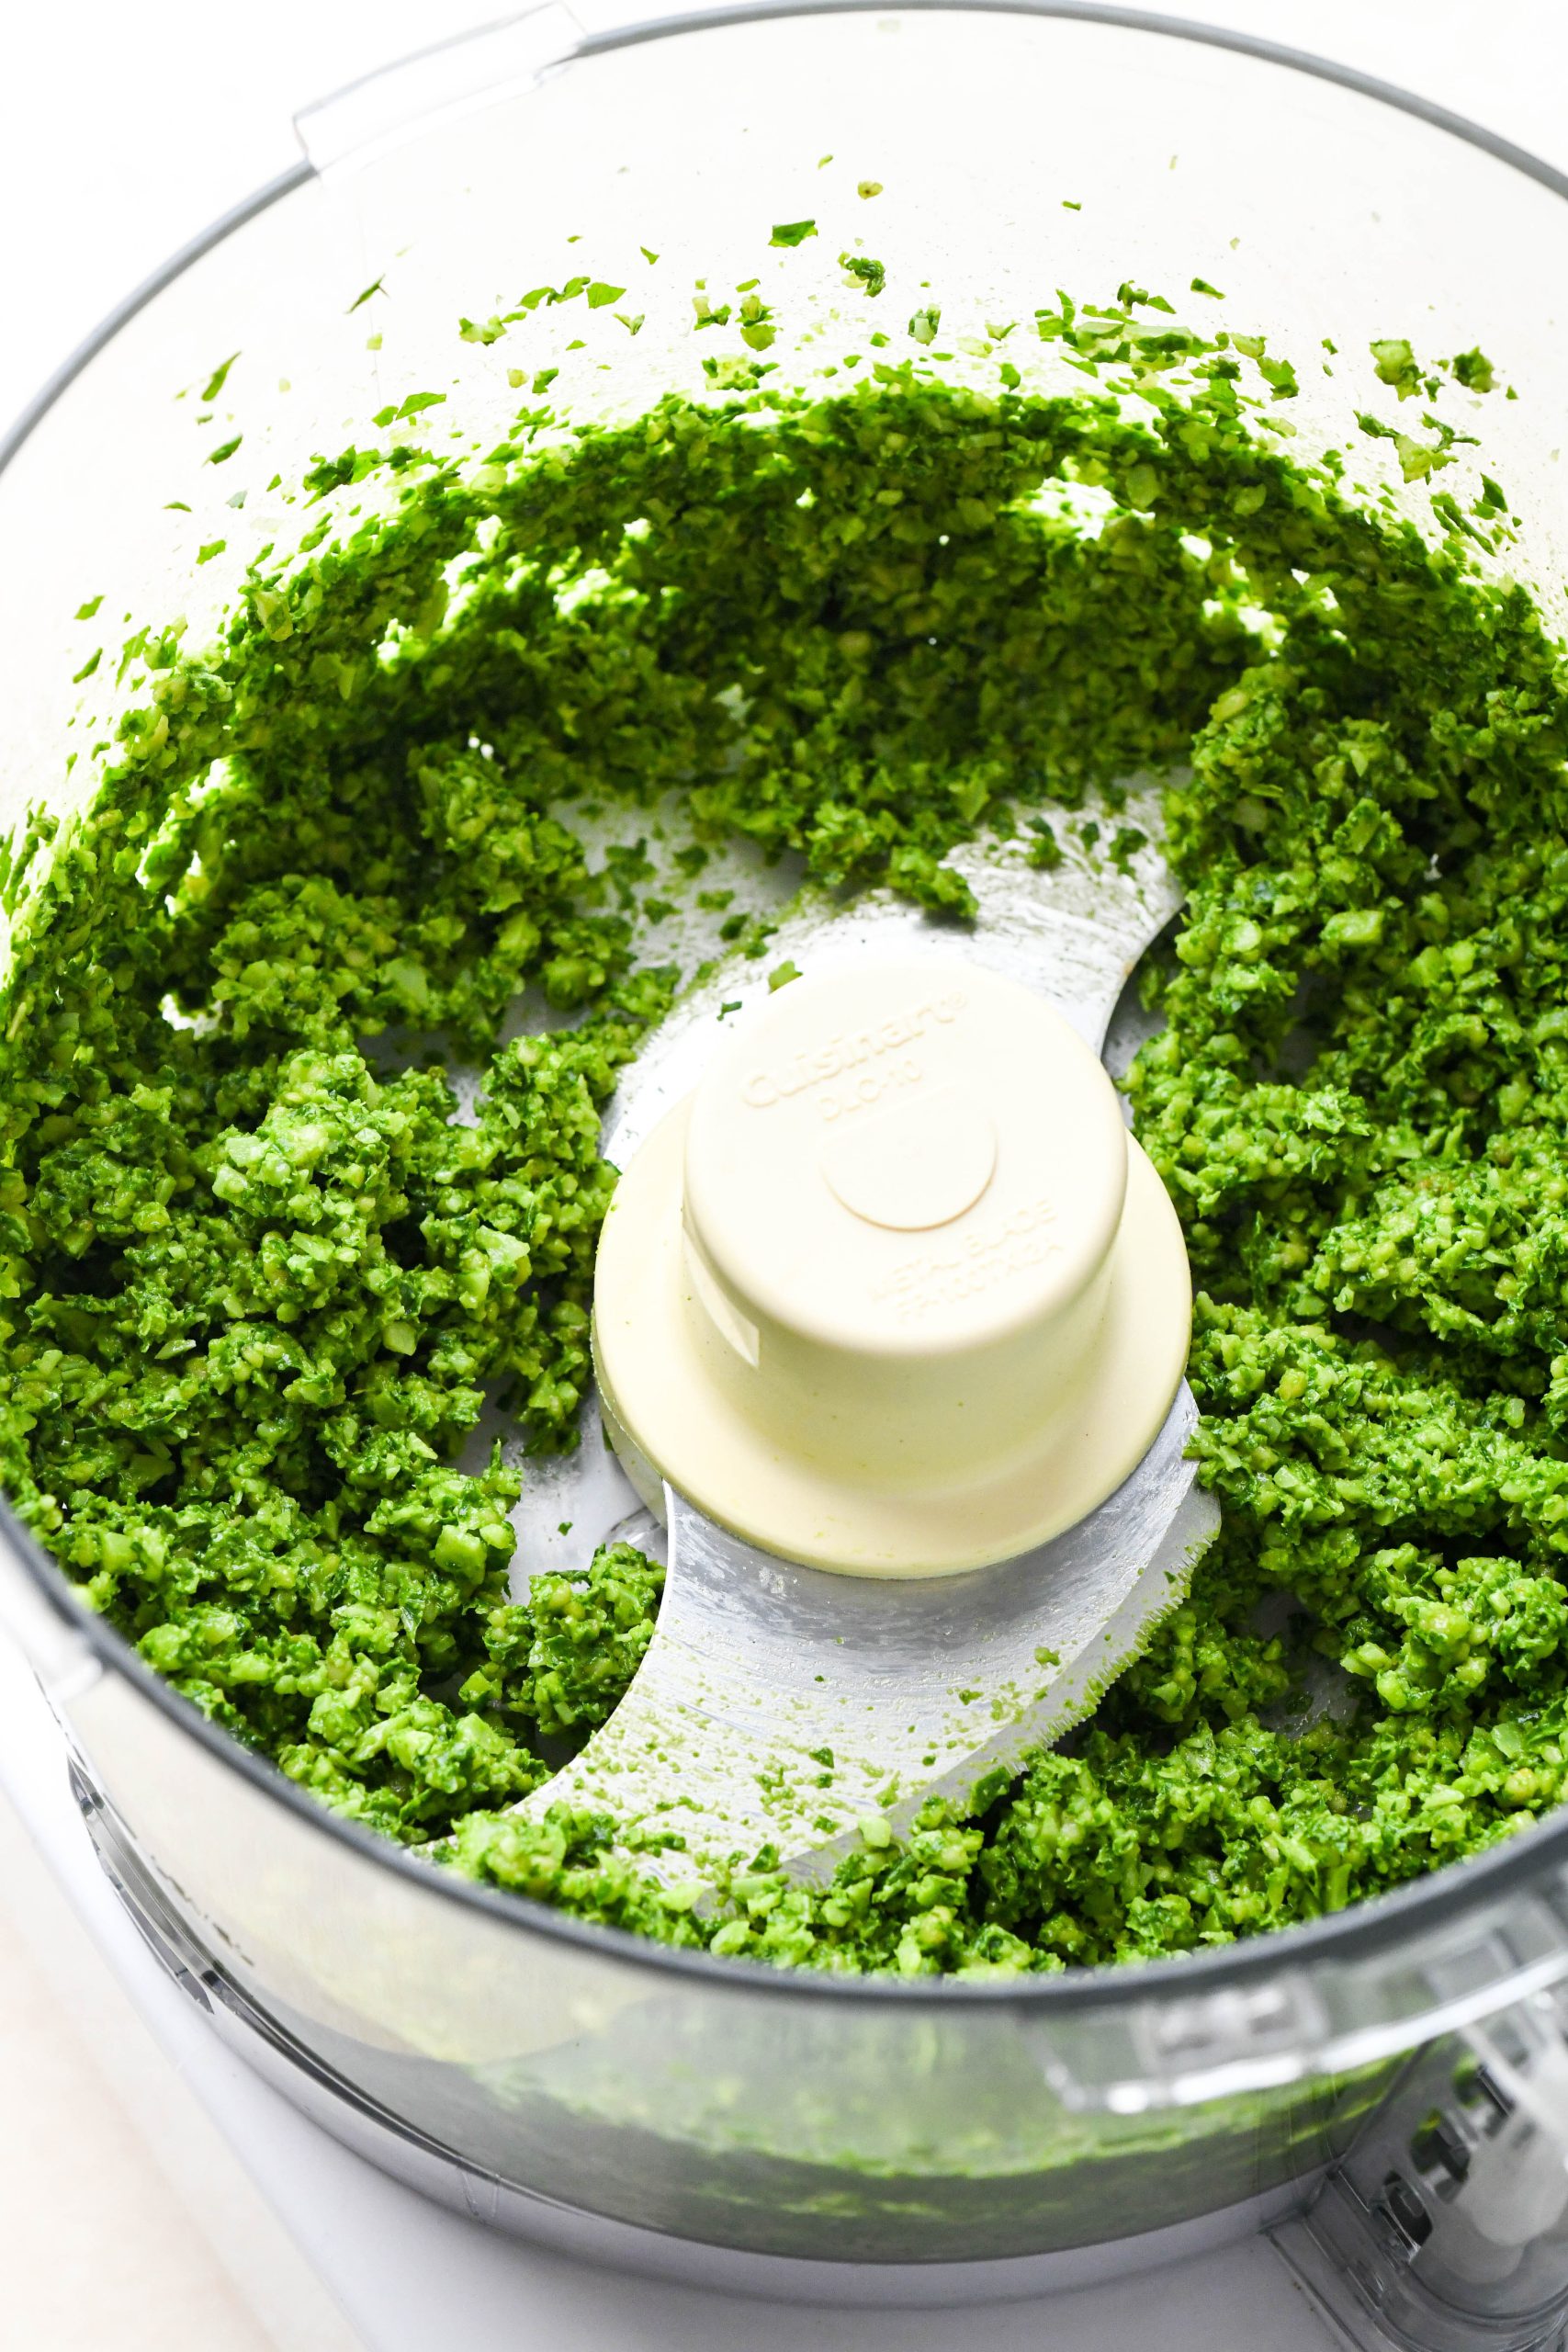 How to make homemade basil pesto: Basil, parmesan, pine nuts, and garlic chopped up in the food processor before adding olive oil.